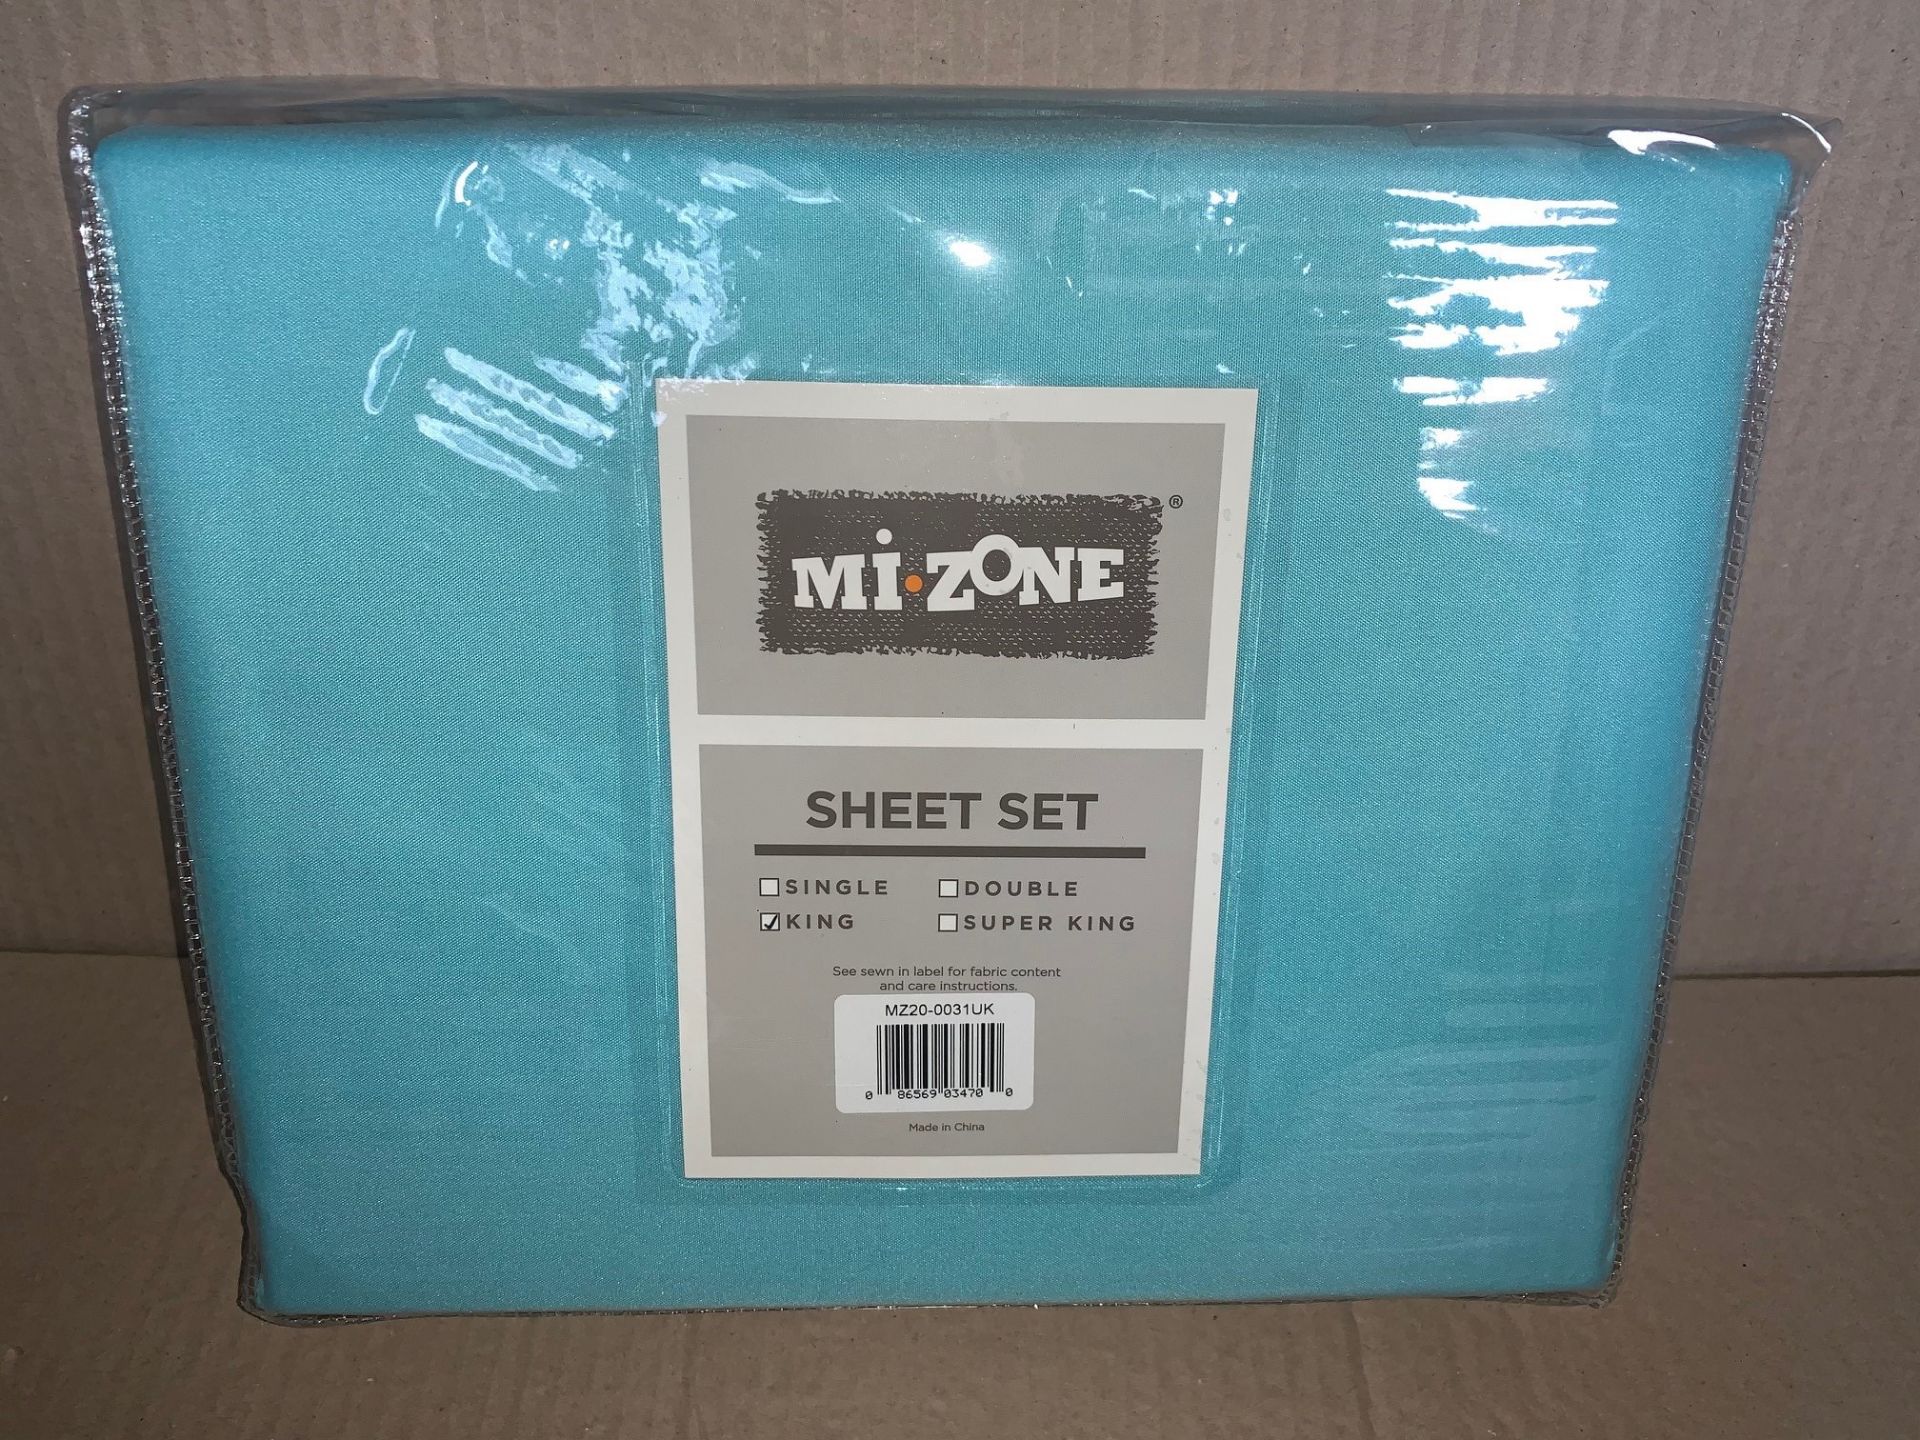 1 x Mi-Zone King Size Sheet Set Teal - Includes Fitted Sheet, Flat Sheet and Pillowcases - Product